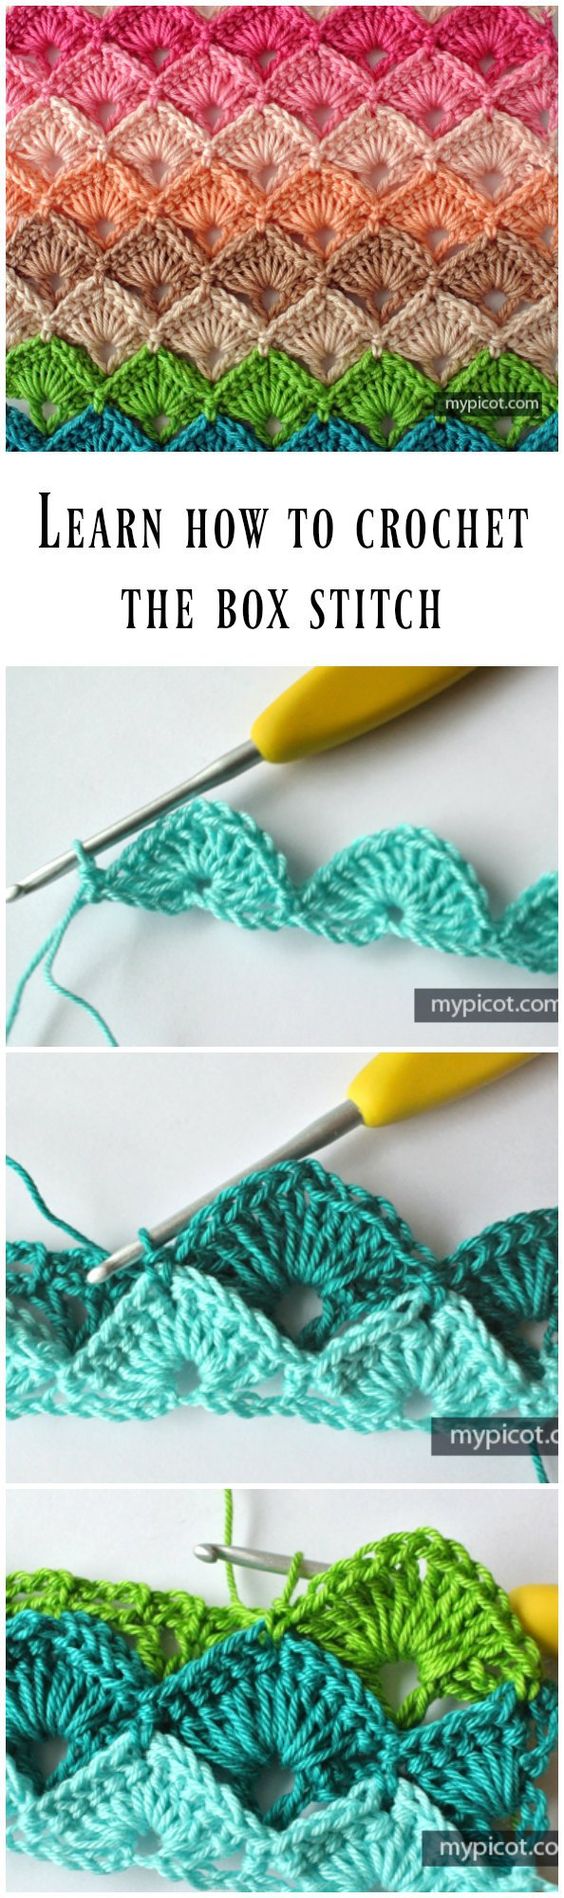 Instructions for how to Crochet the Box Stitch. 